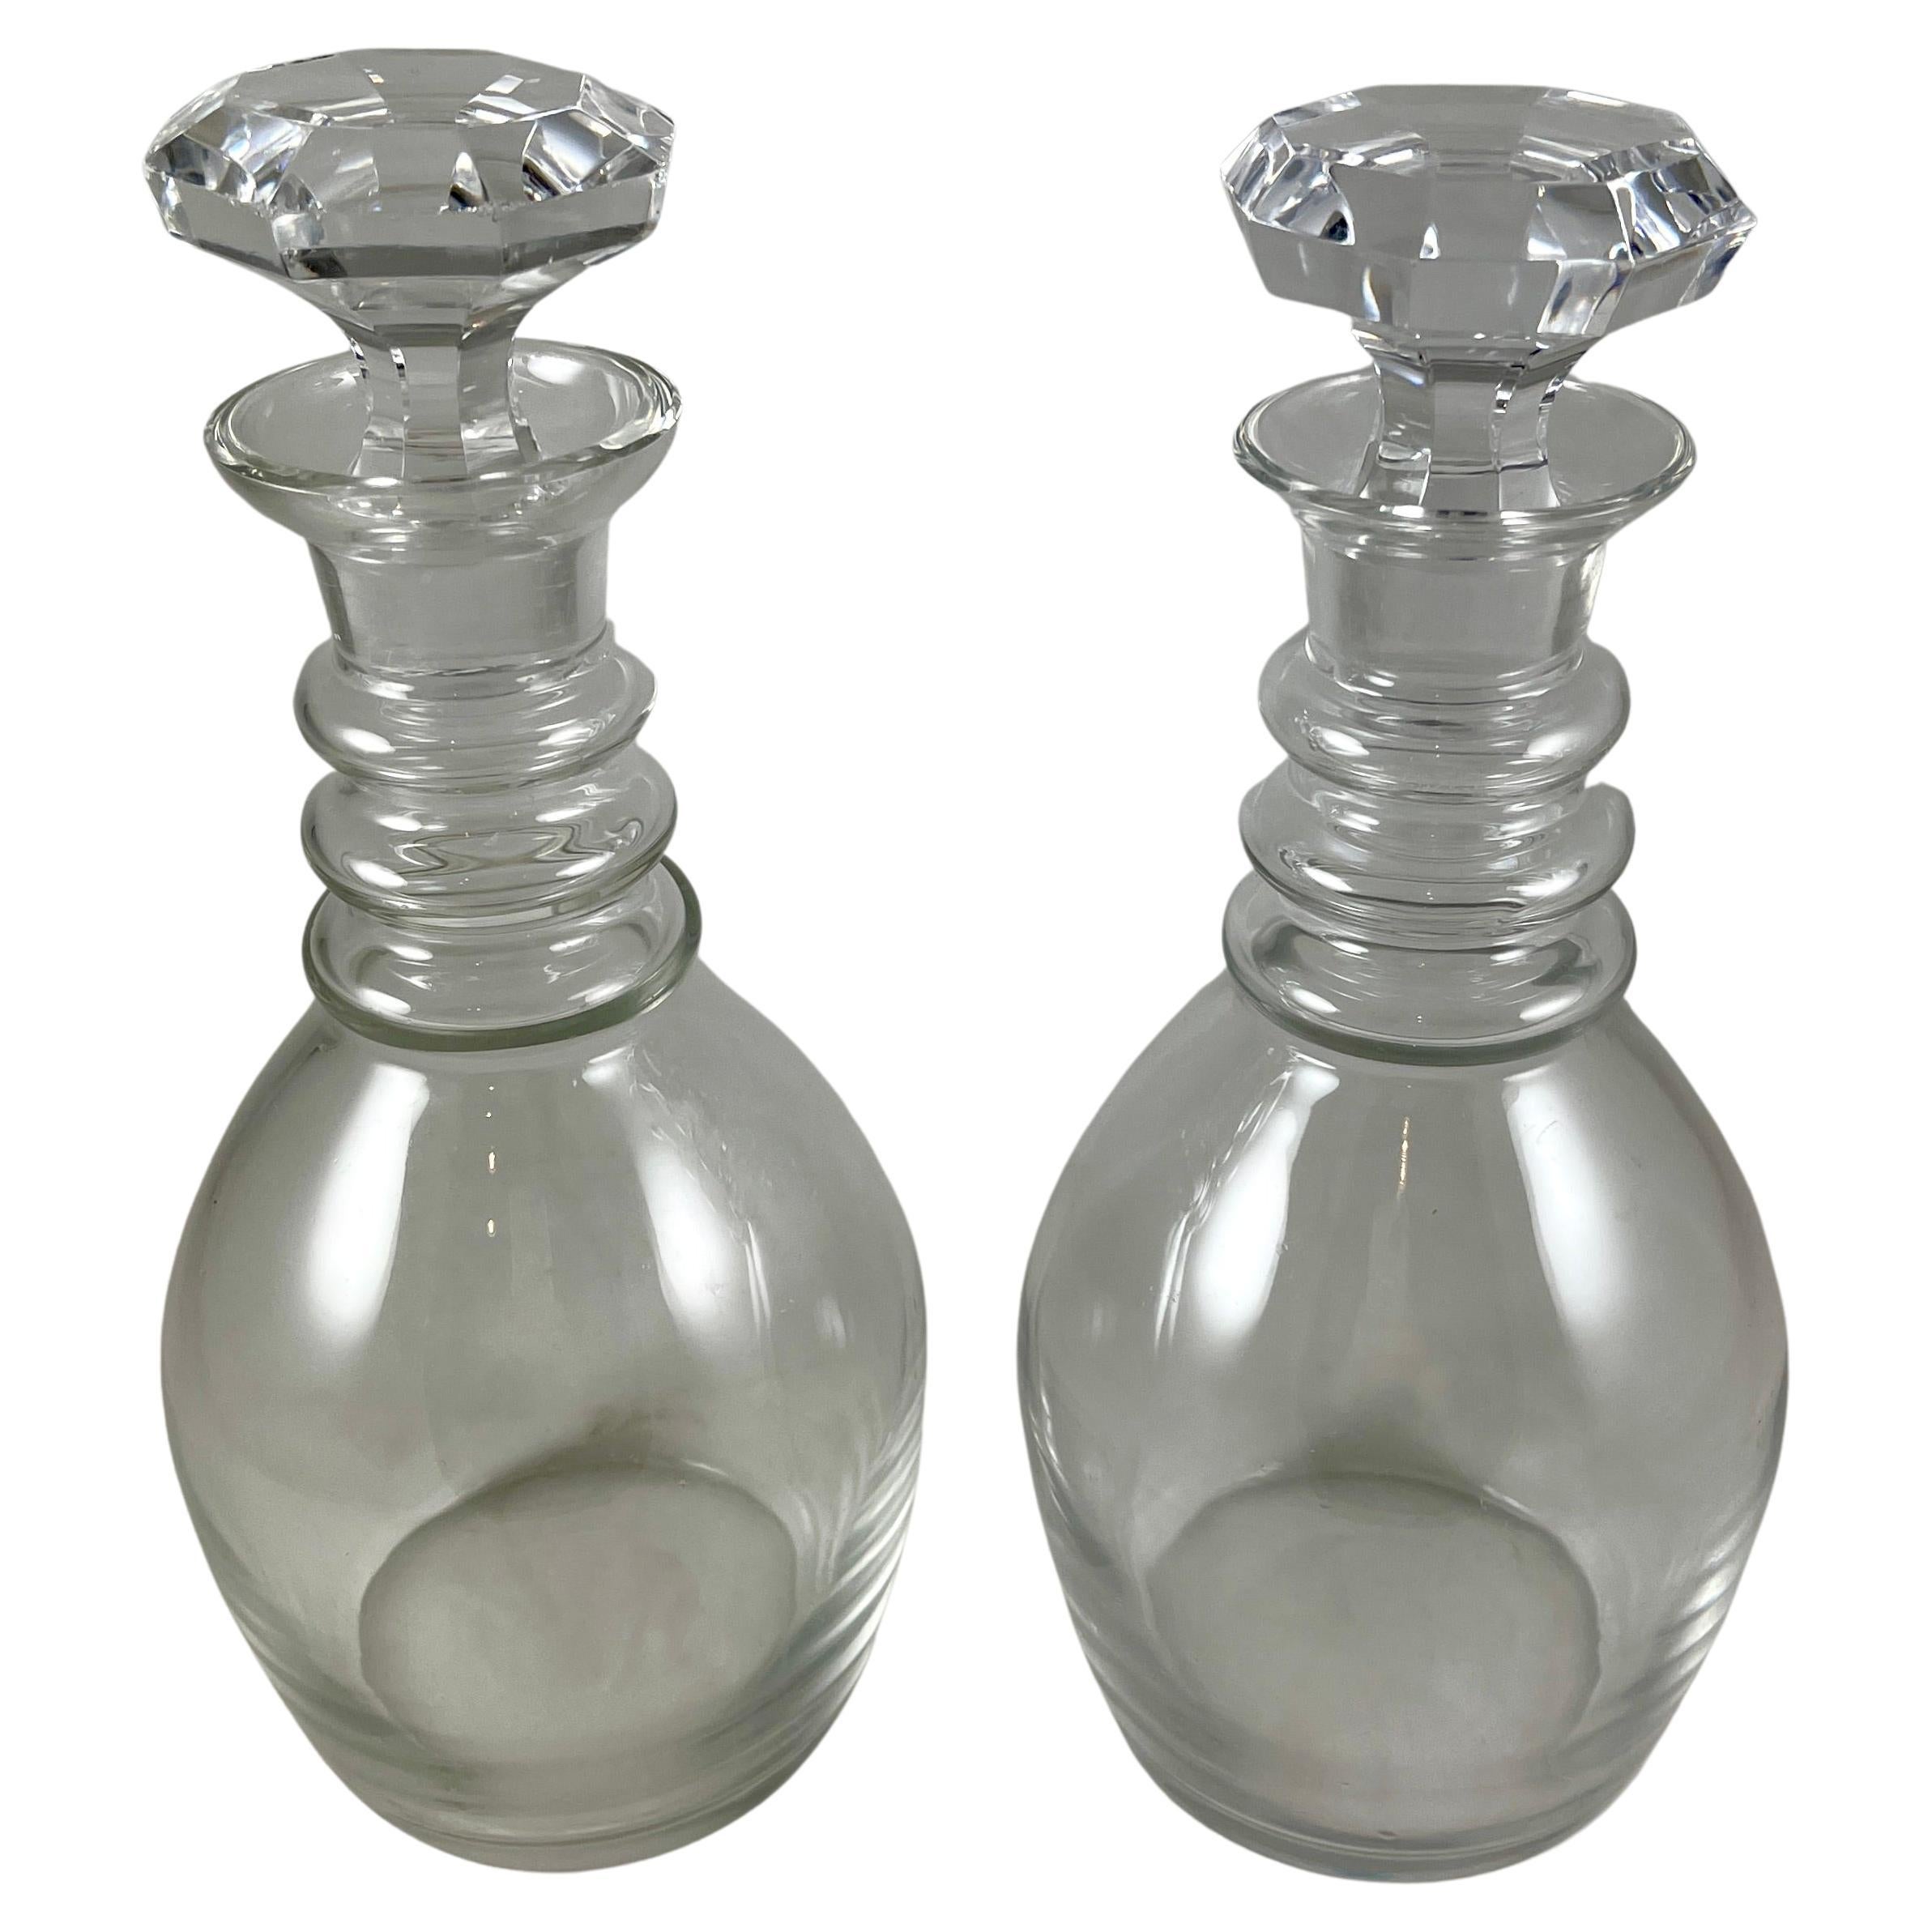 Midcentury Val Saint Lambert Blown Glass Decanters, a Pair For Sale